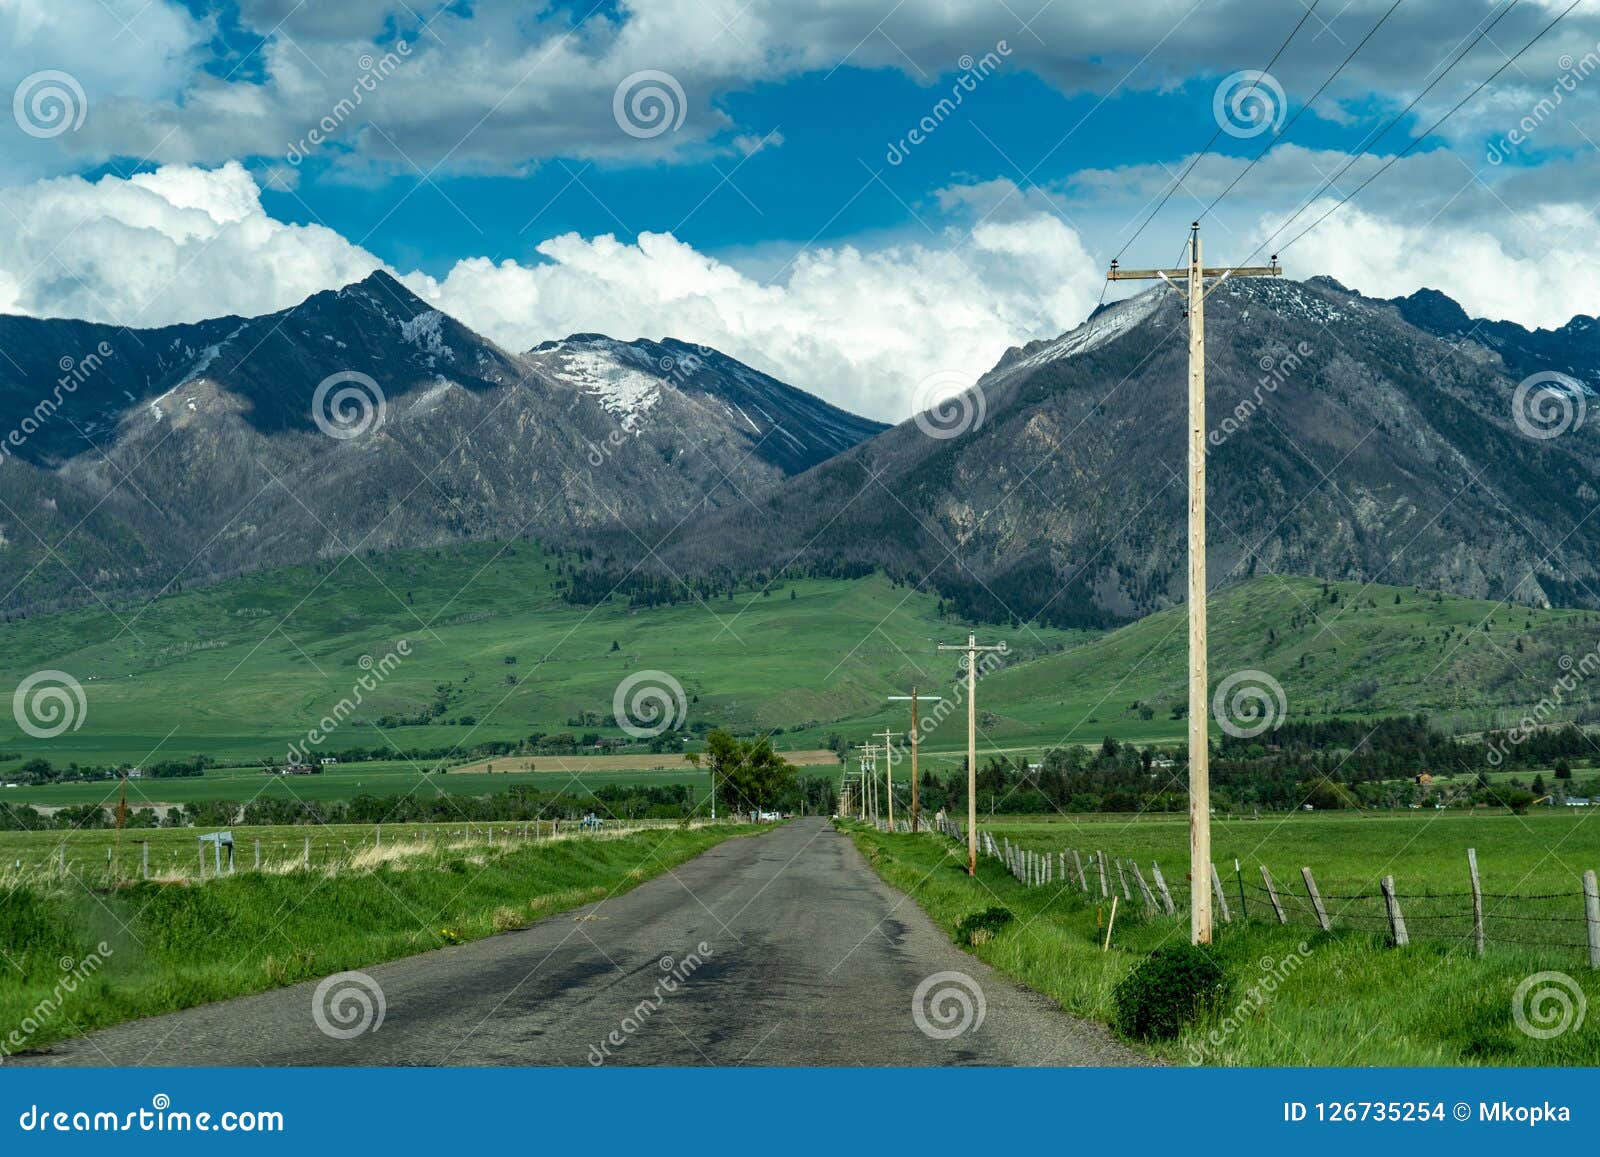 paved road with leading into the absaroka mountain range near livingston montana in paradise valley